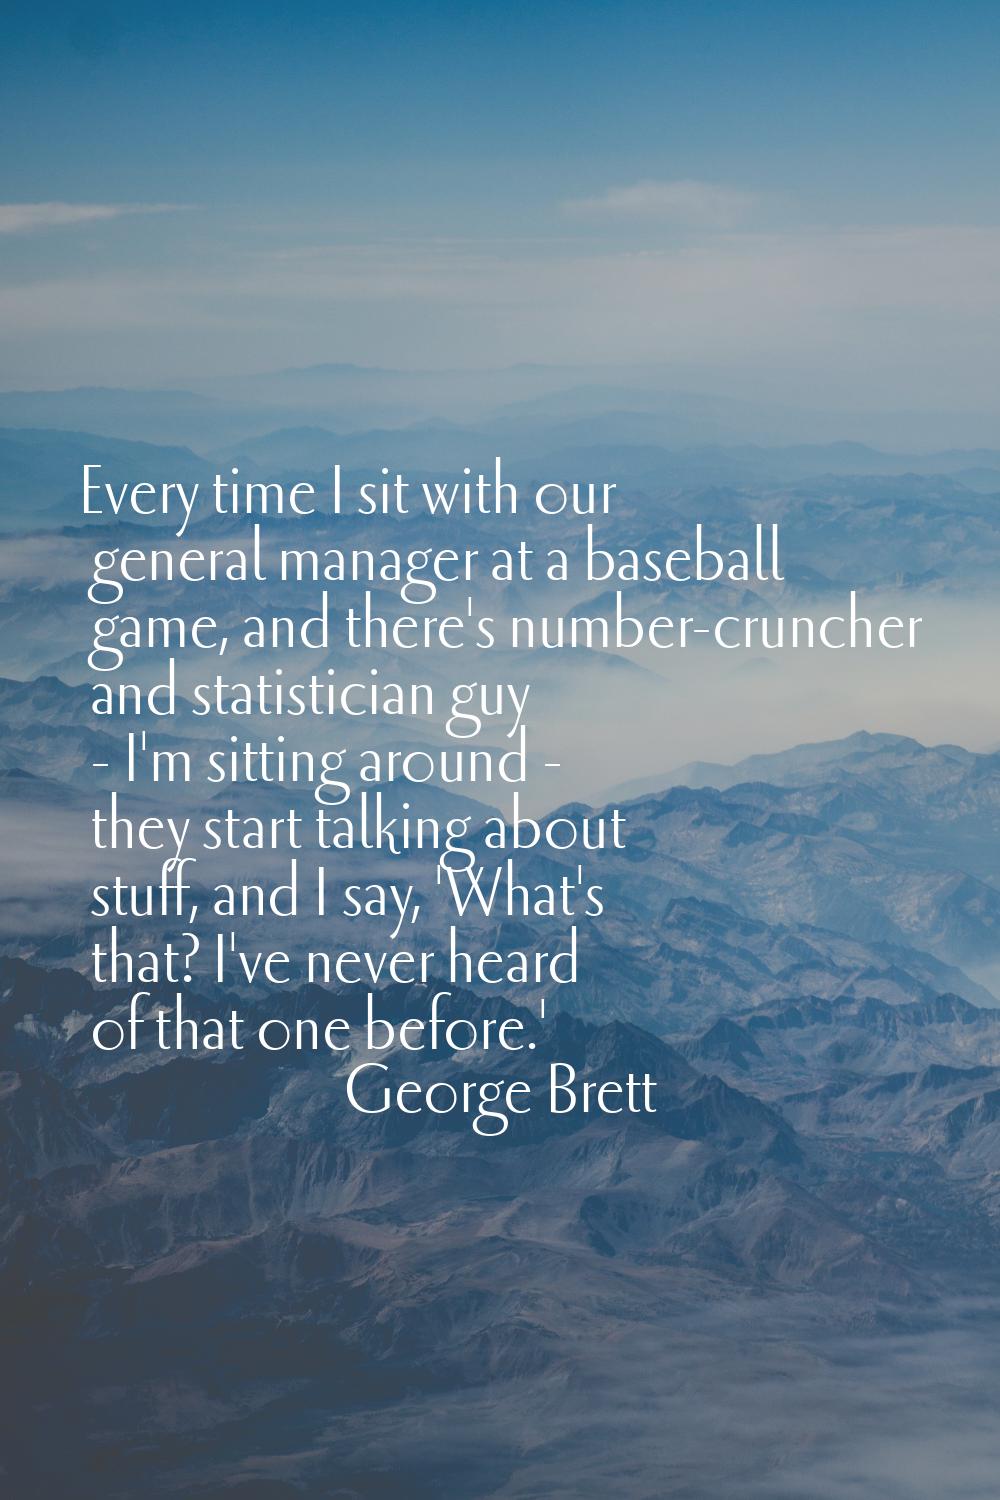 Every time I sit with our general manager at a baseball game, and there's number-cruncher and stati